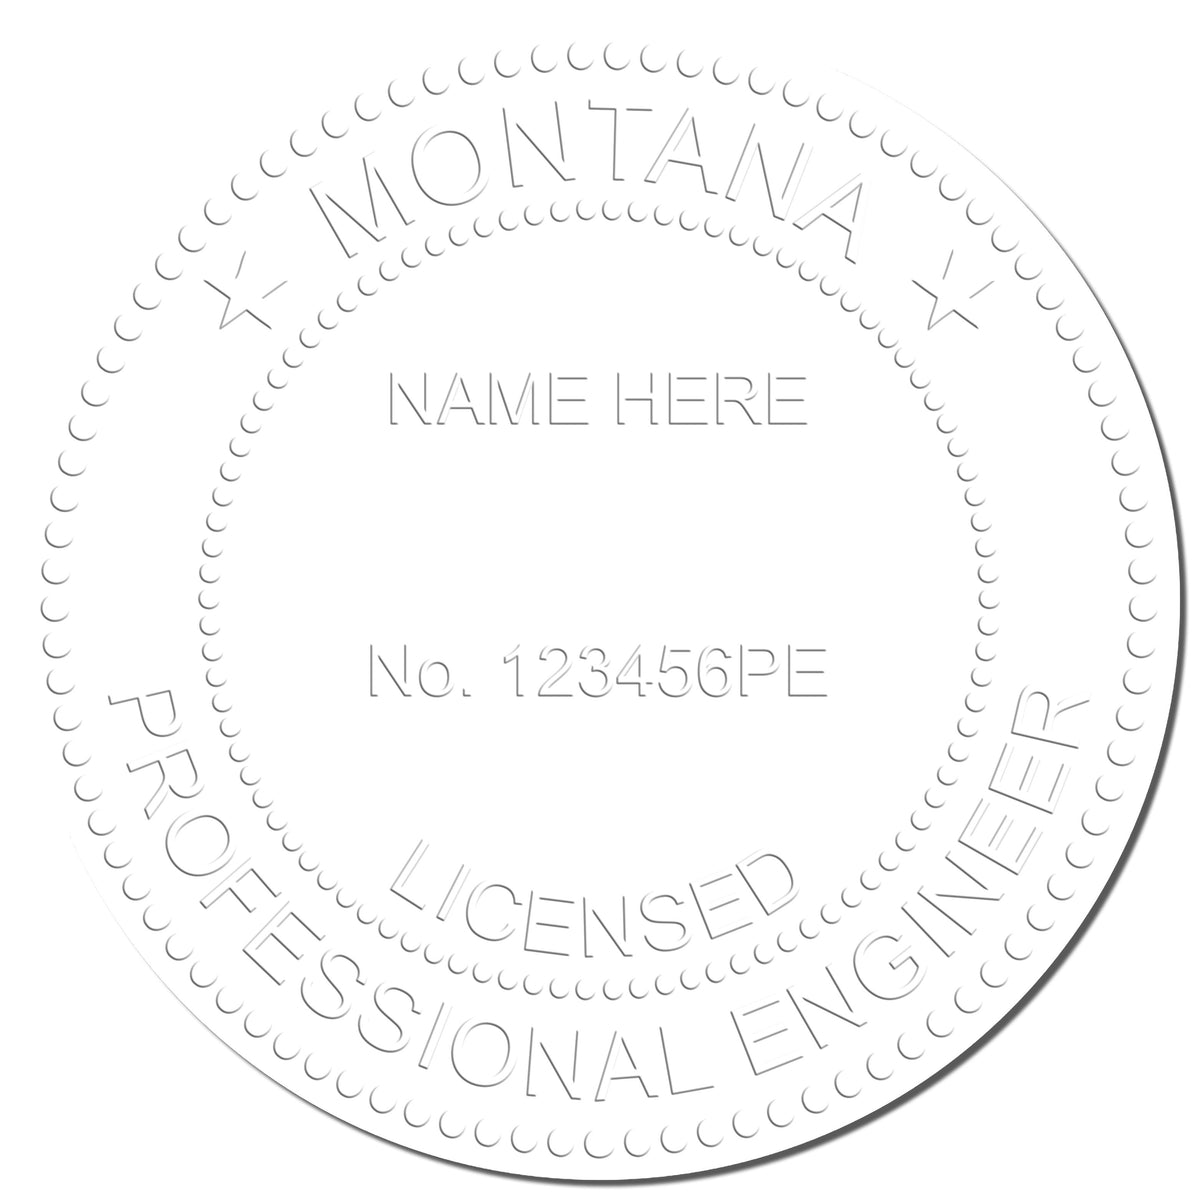 The Soft Montana Professional Engineer Seal stamp impression comes to life with a crisp, detailed photo on paper - showcasing true professional quality.